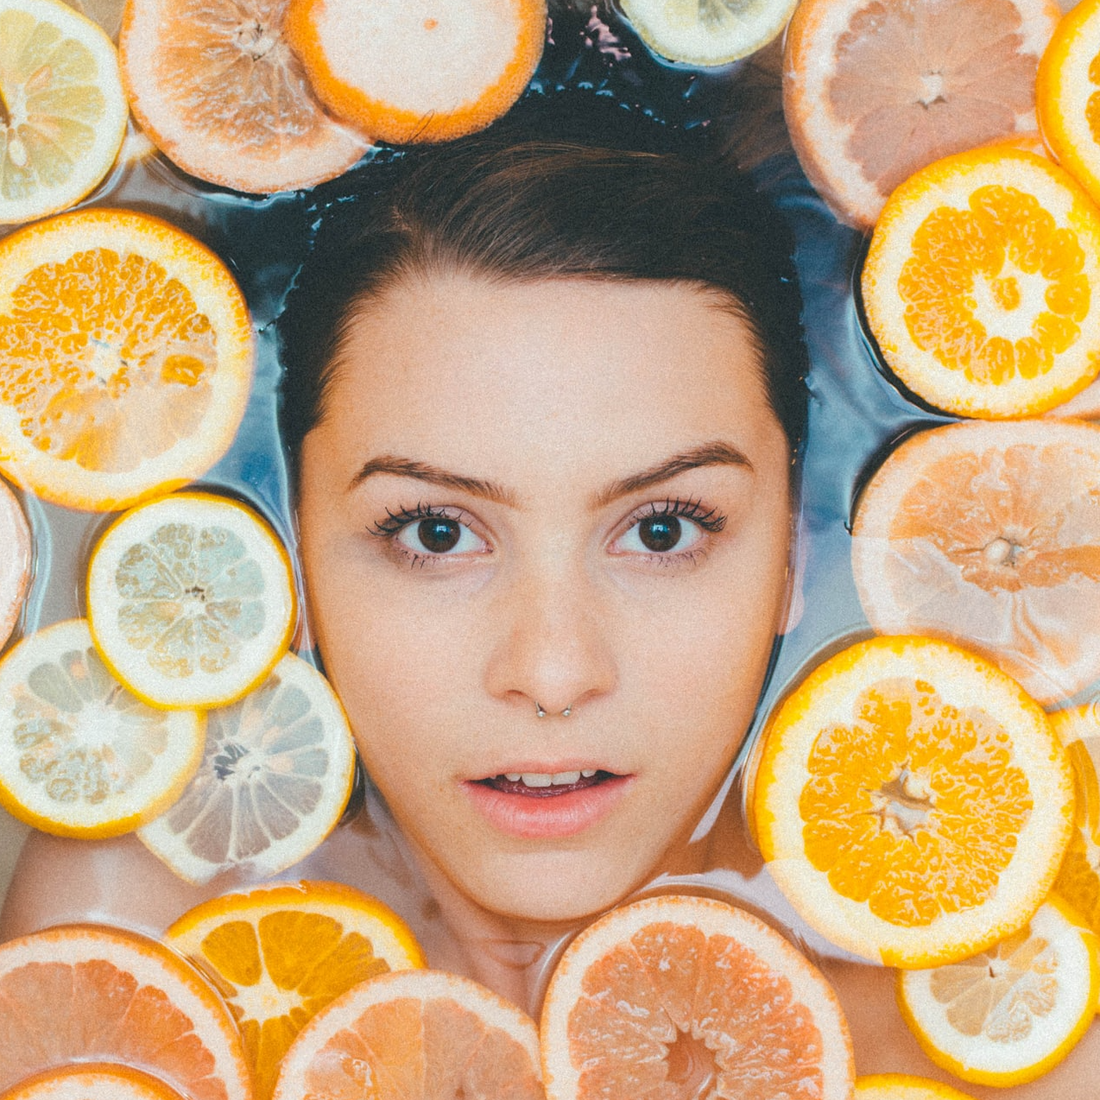 What are the Best Foods for your Skin?